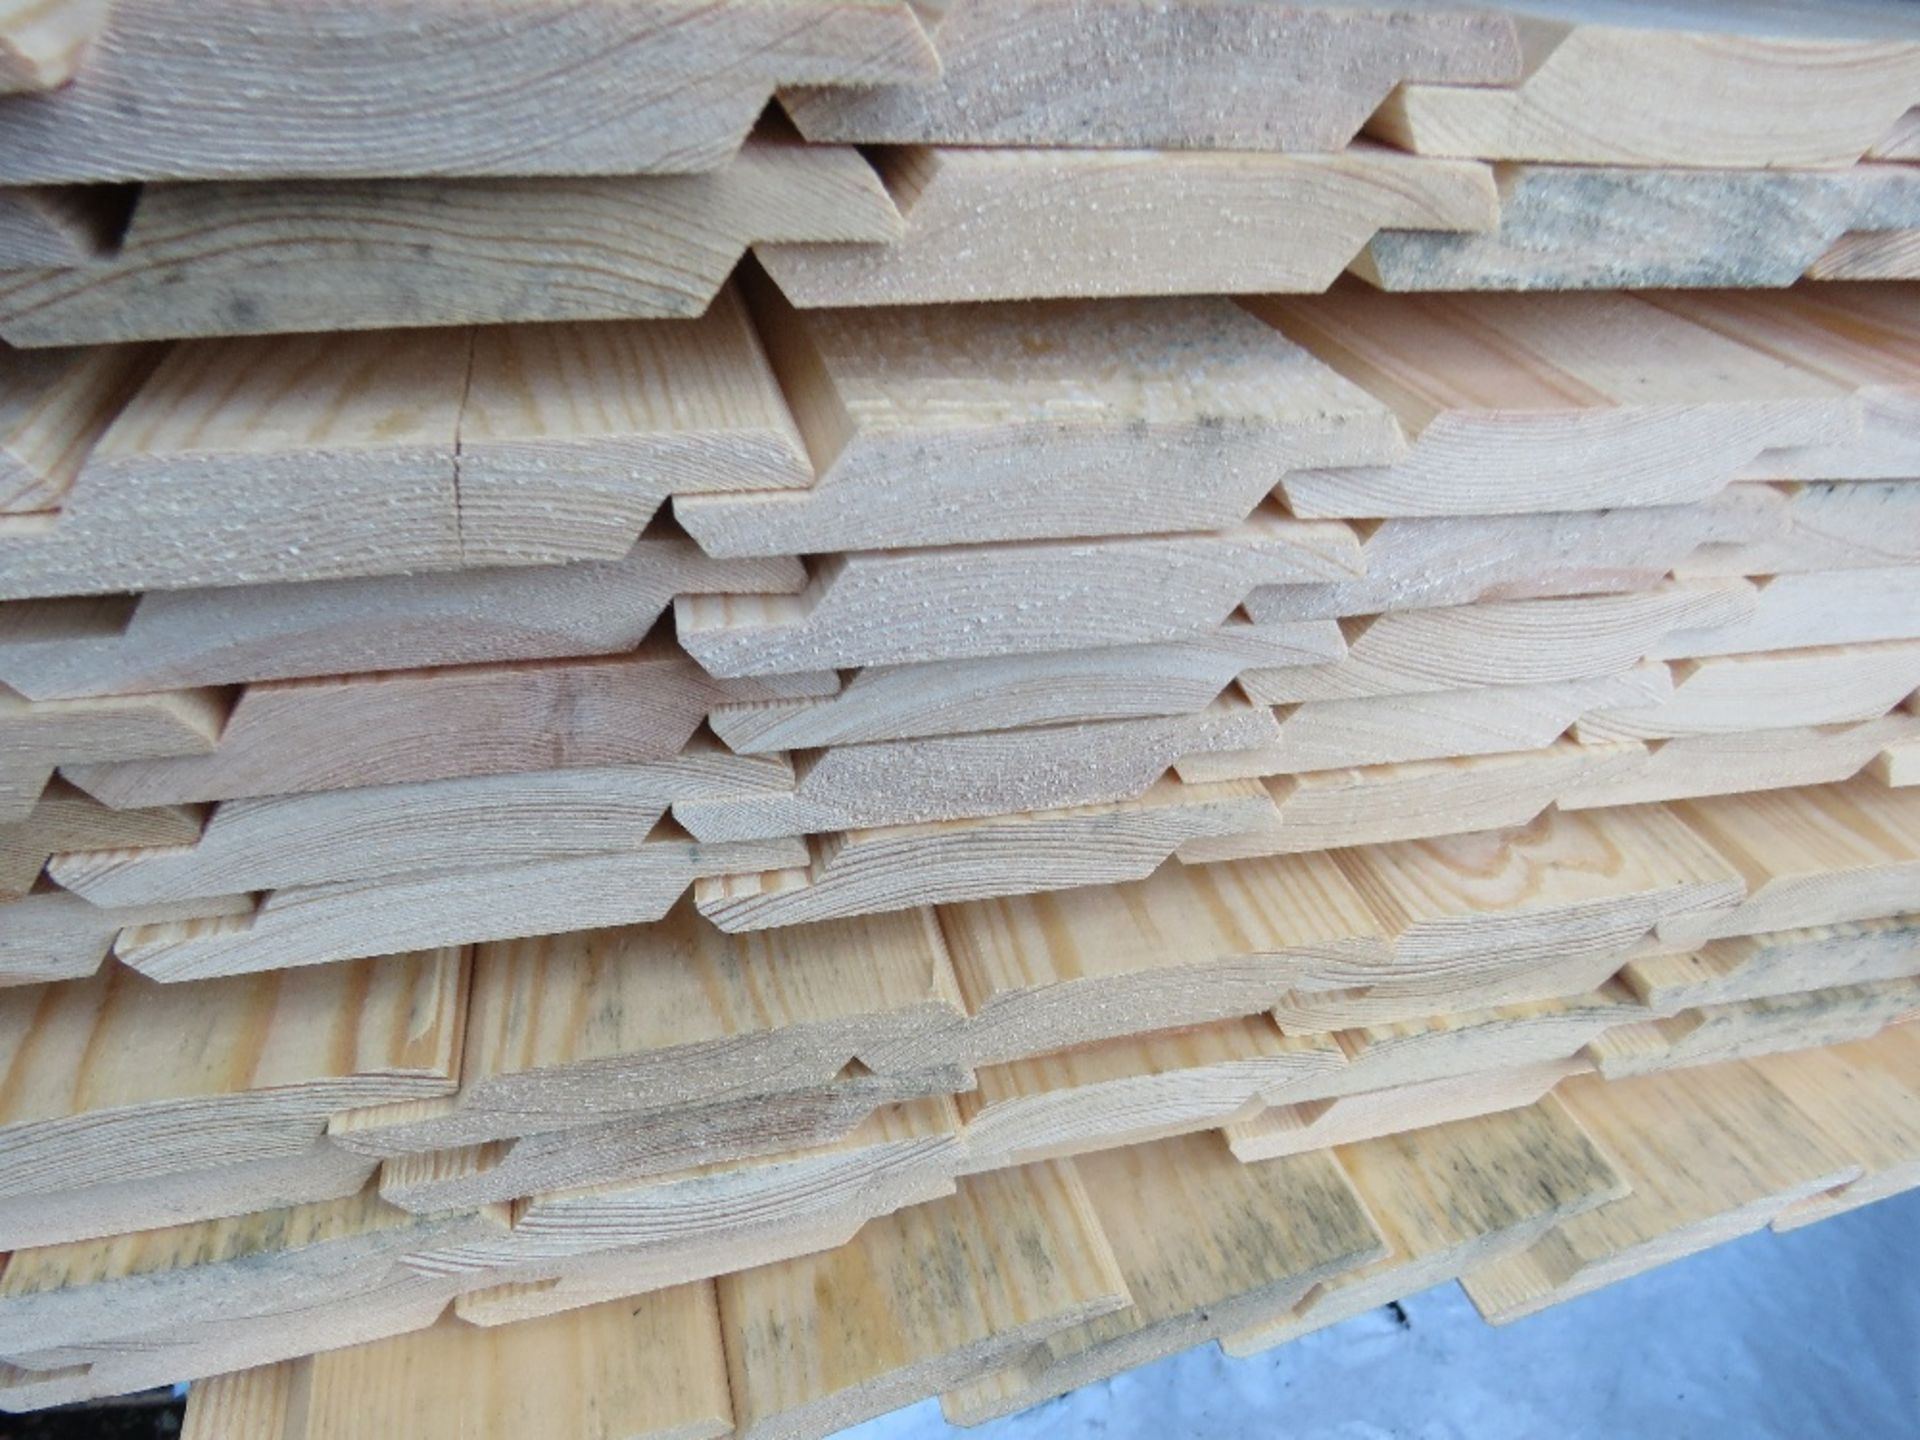 STACK CONTAINING 3 BUNDLES OF UNTREATED SHIPLAP TIMBER FENCE CLADDING BOARDS. SIZE: 1.75-2.1M LE - Image 4 of 5